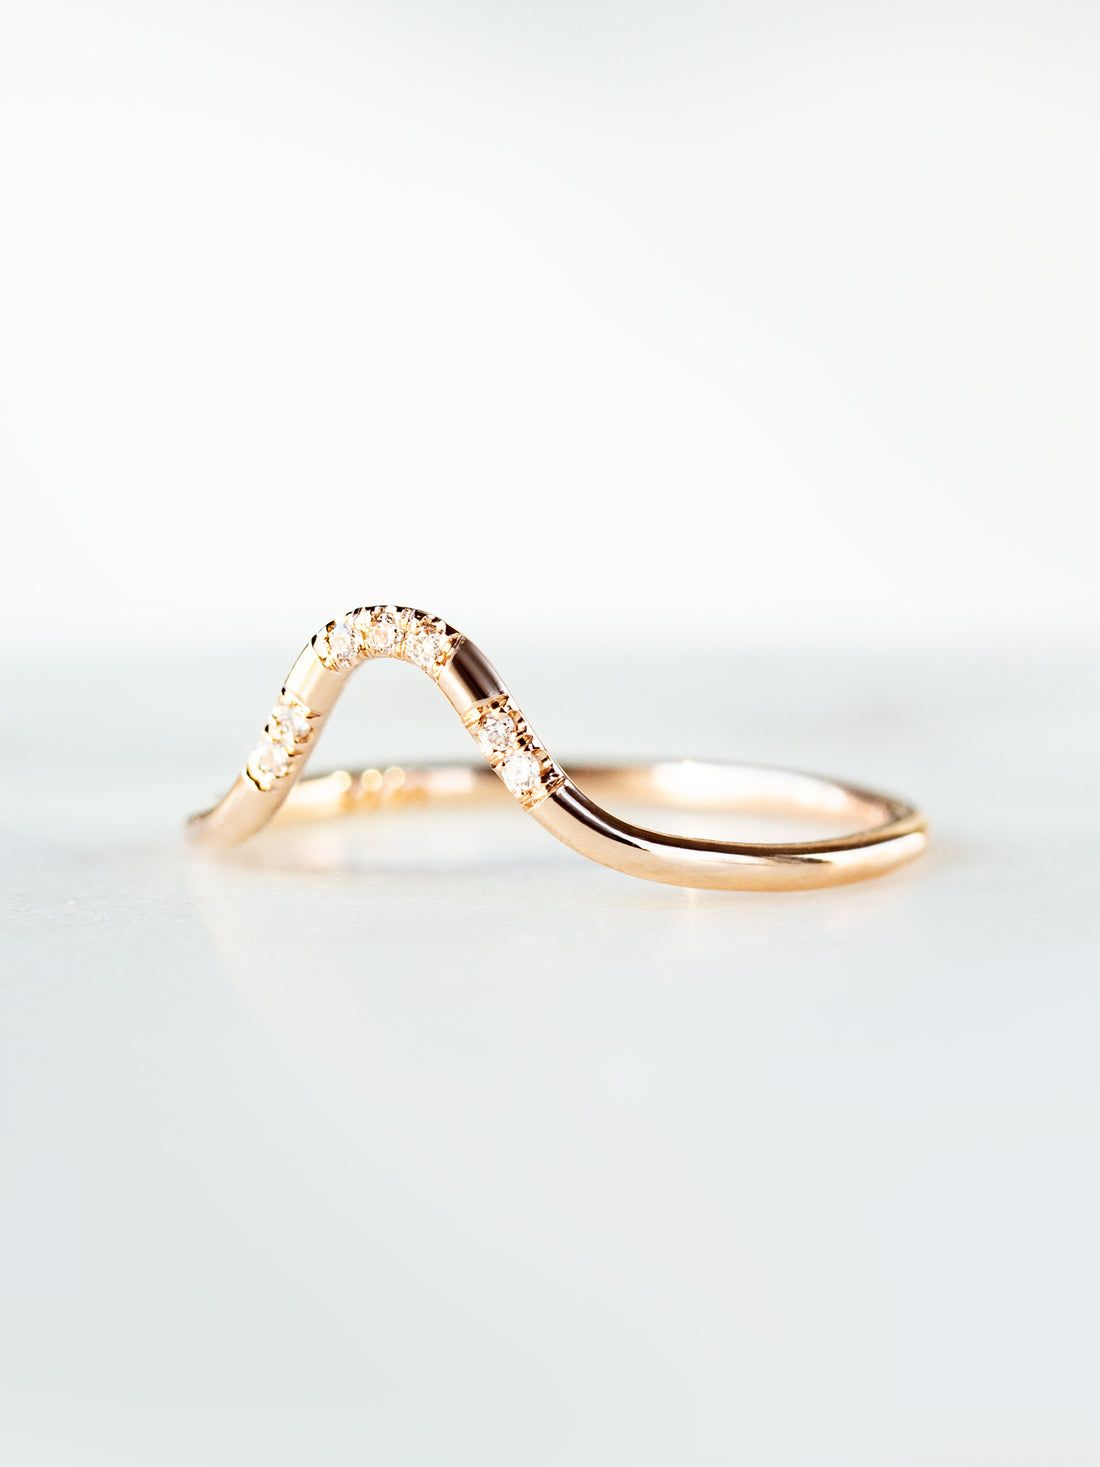 hiddenspace jewelry los angeles fine jewelry engagement ring stacking rings diamond 14k gold ring unique jewelry minimalism jewelry modern art eliana band